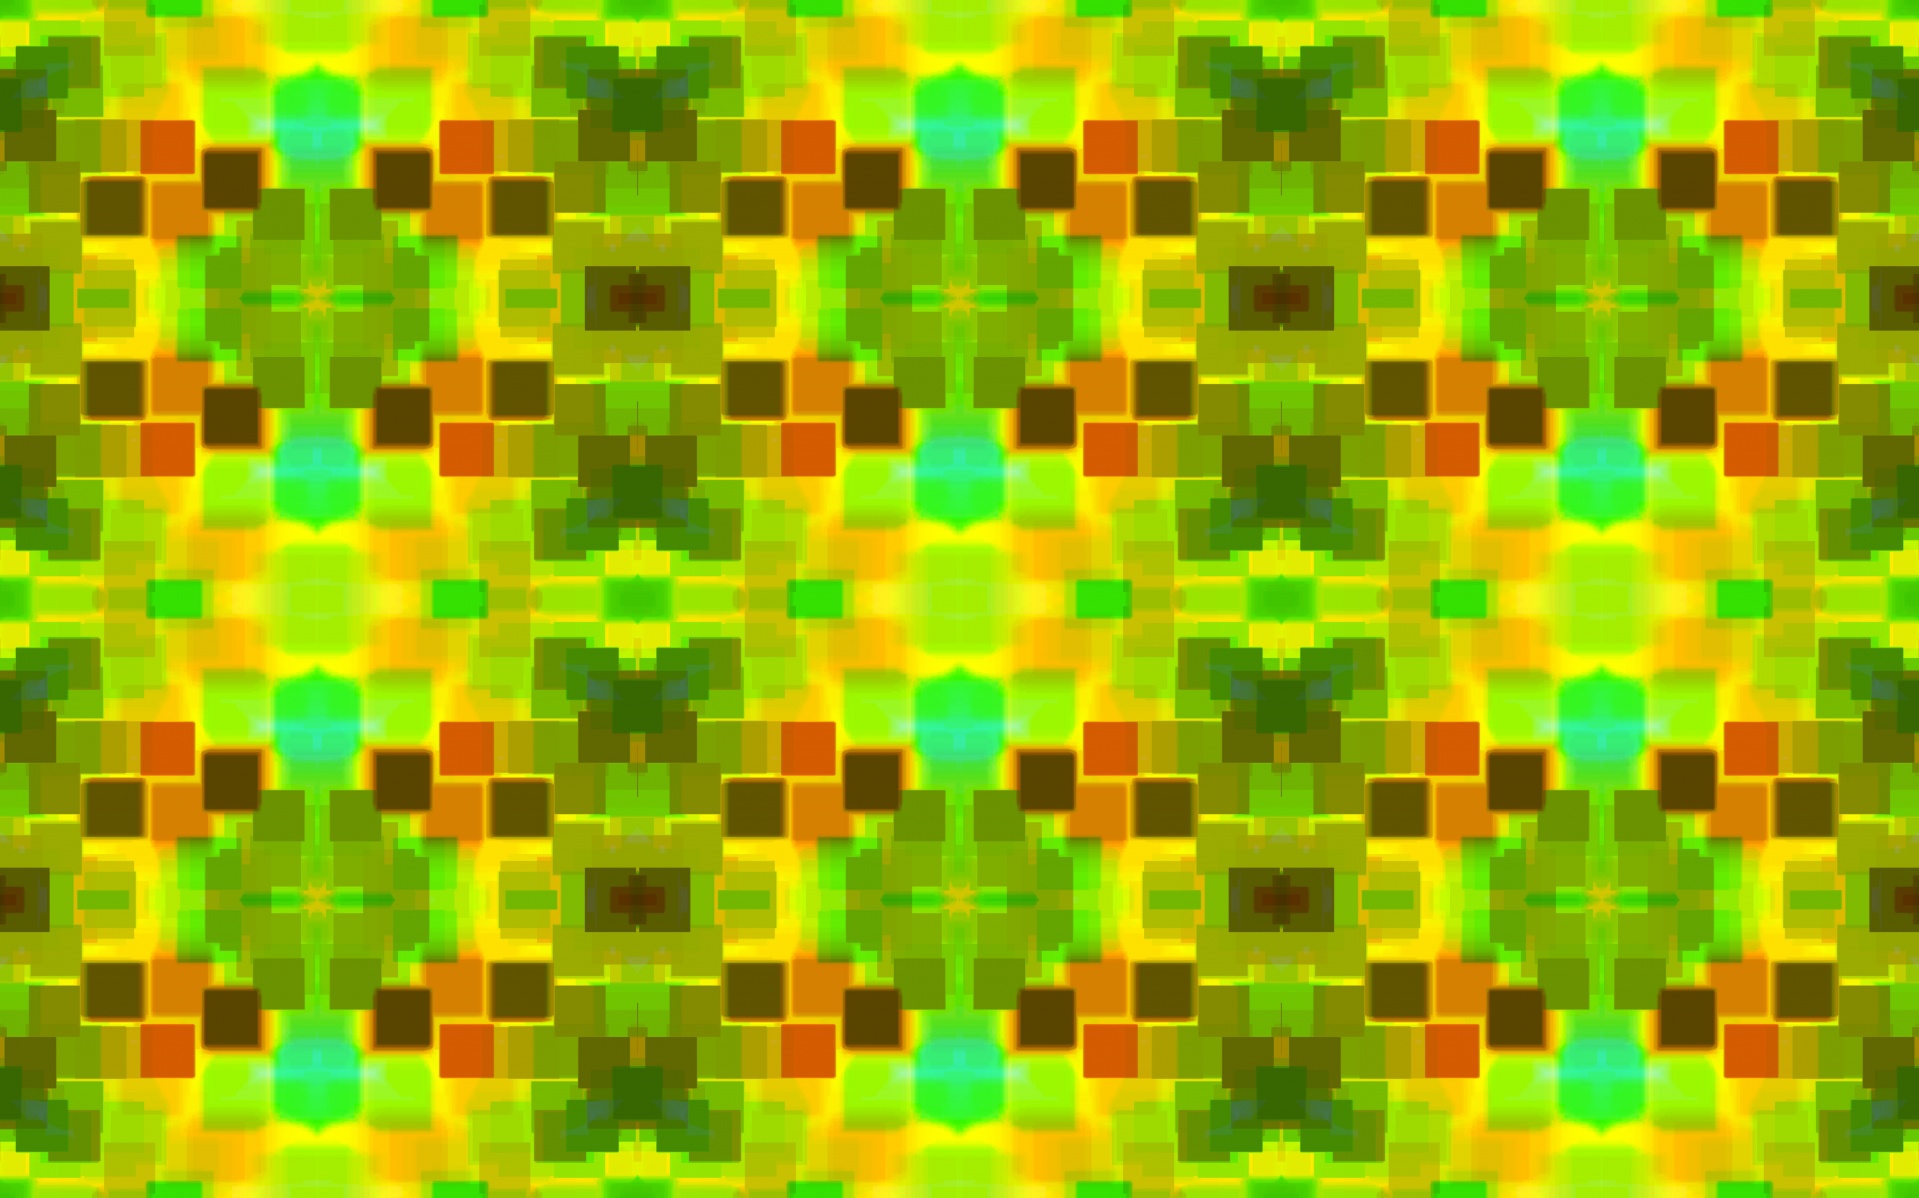 Block Pattern In Greens And Yellows